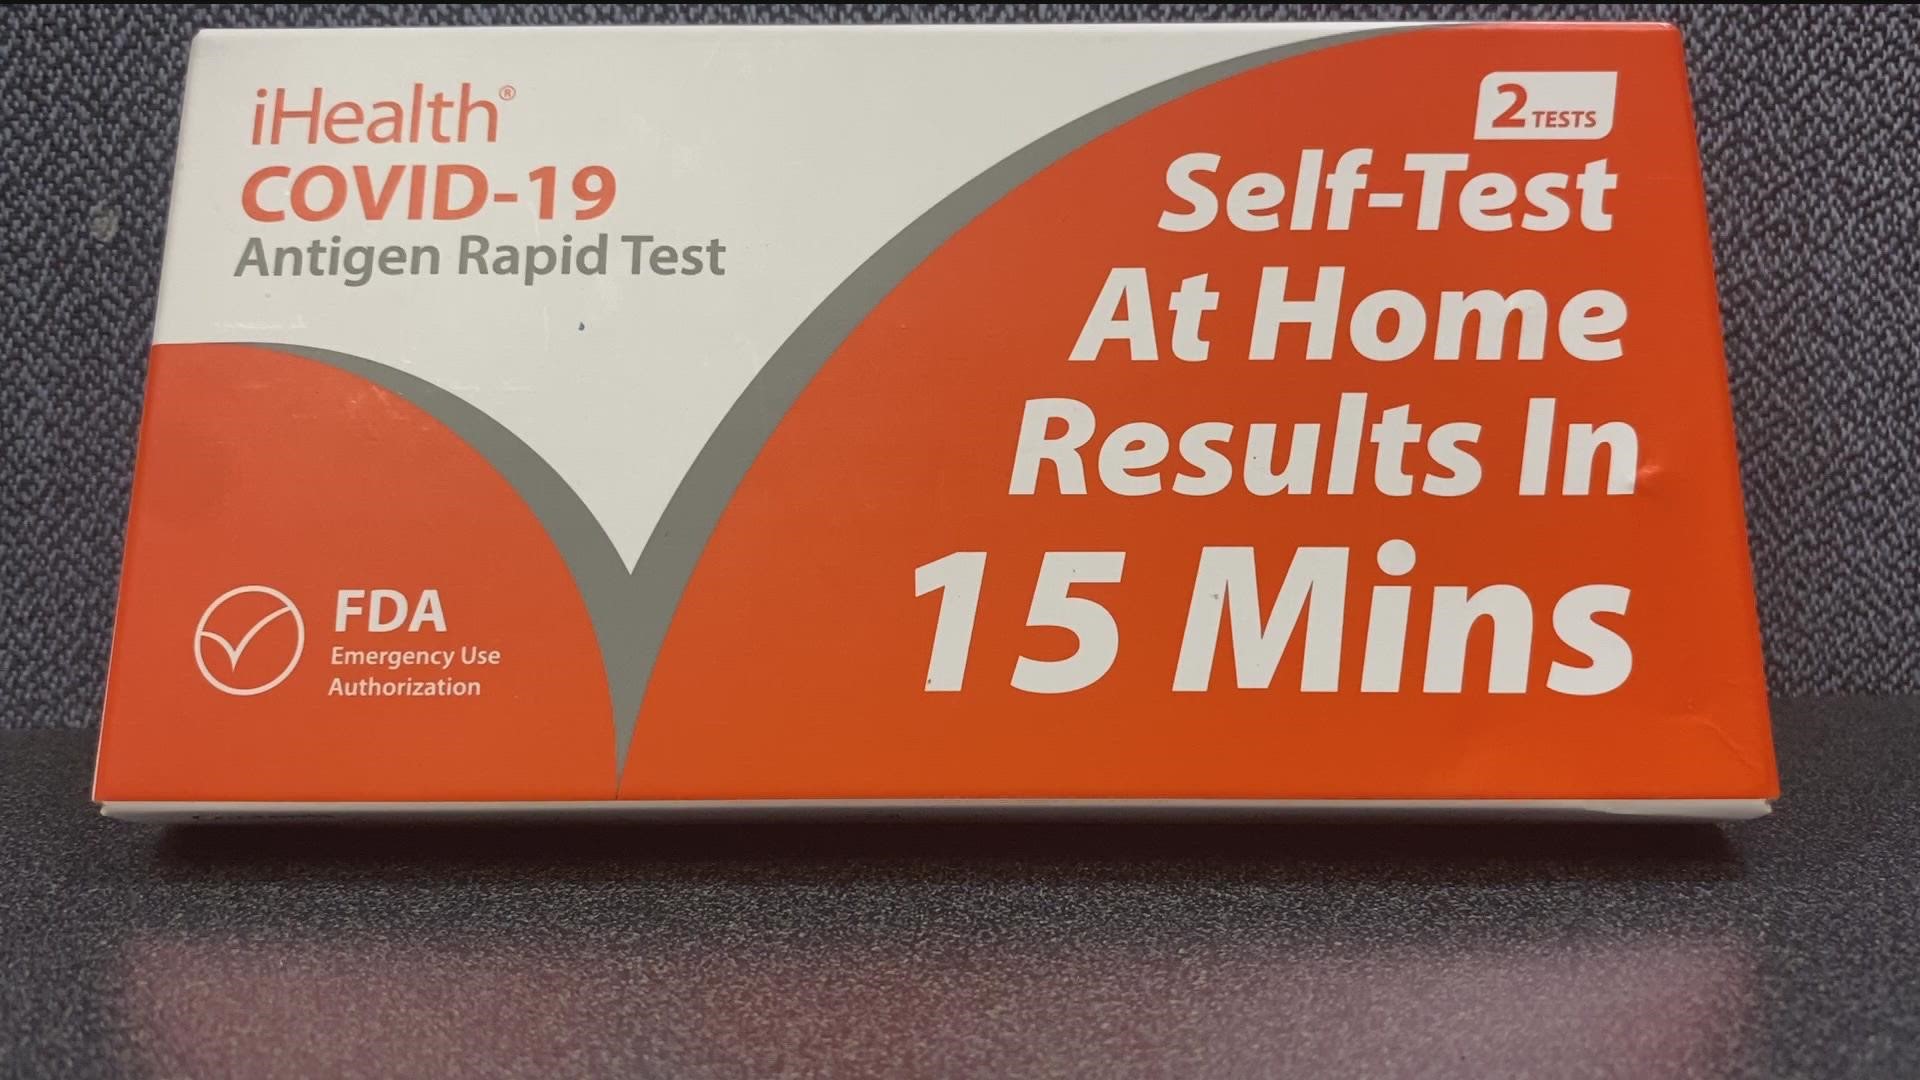 When the federal government sent out its first batch of free tests to residents, a CBS 8 employee received one in a box that shows it's set to expire next month.